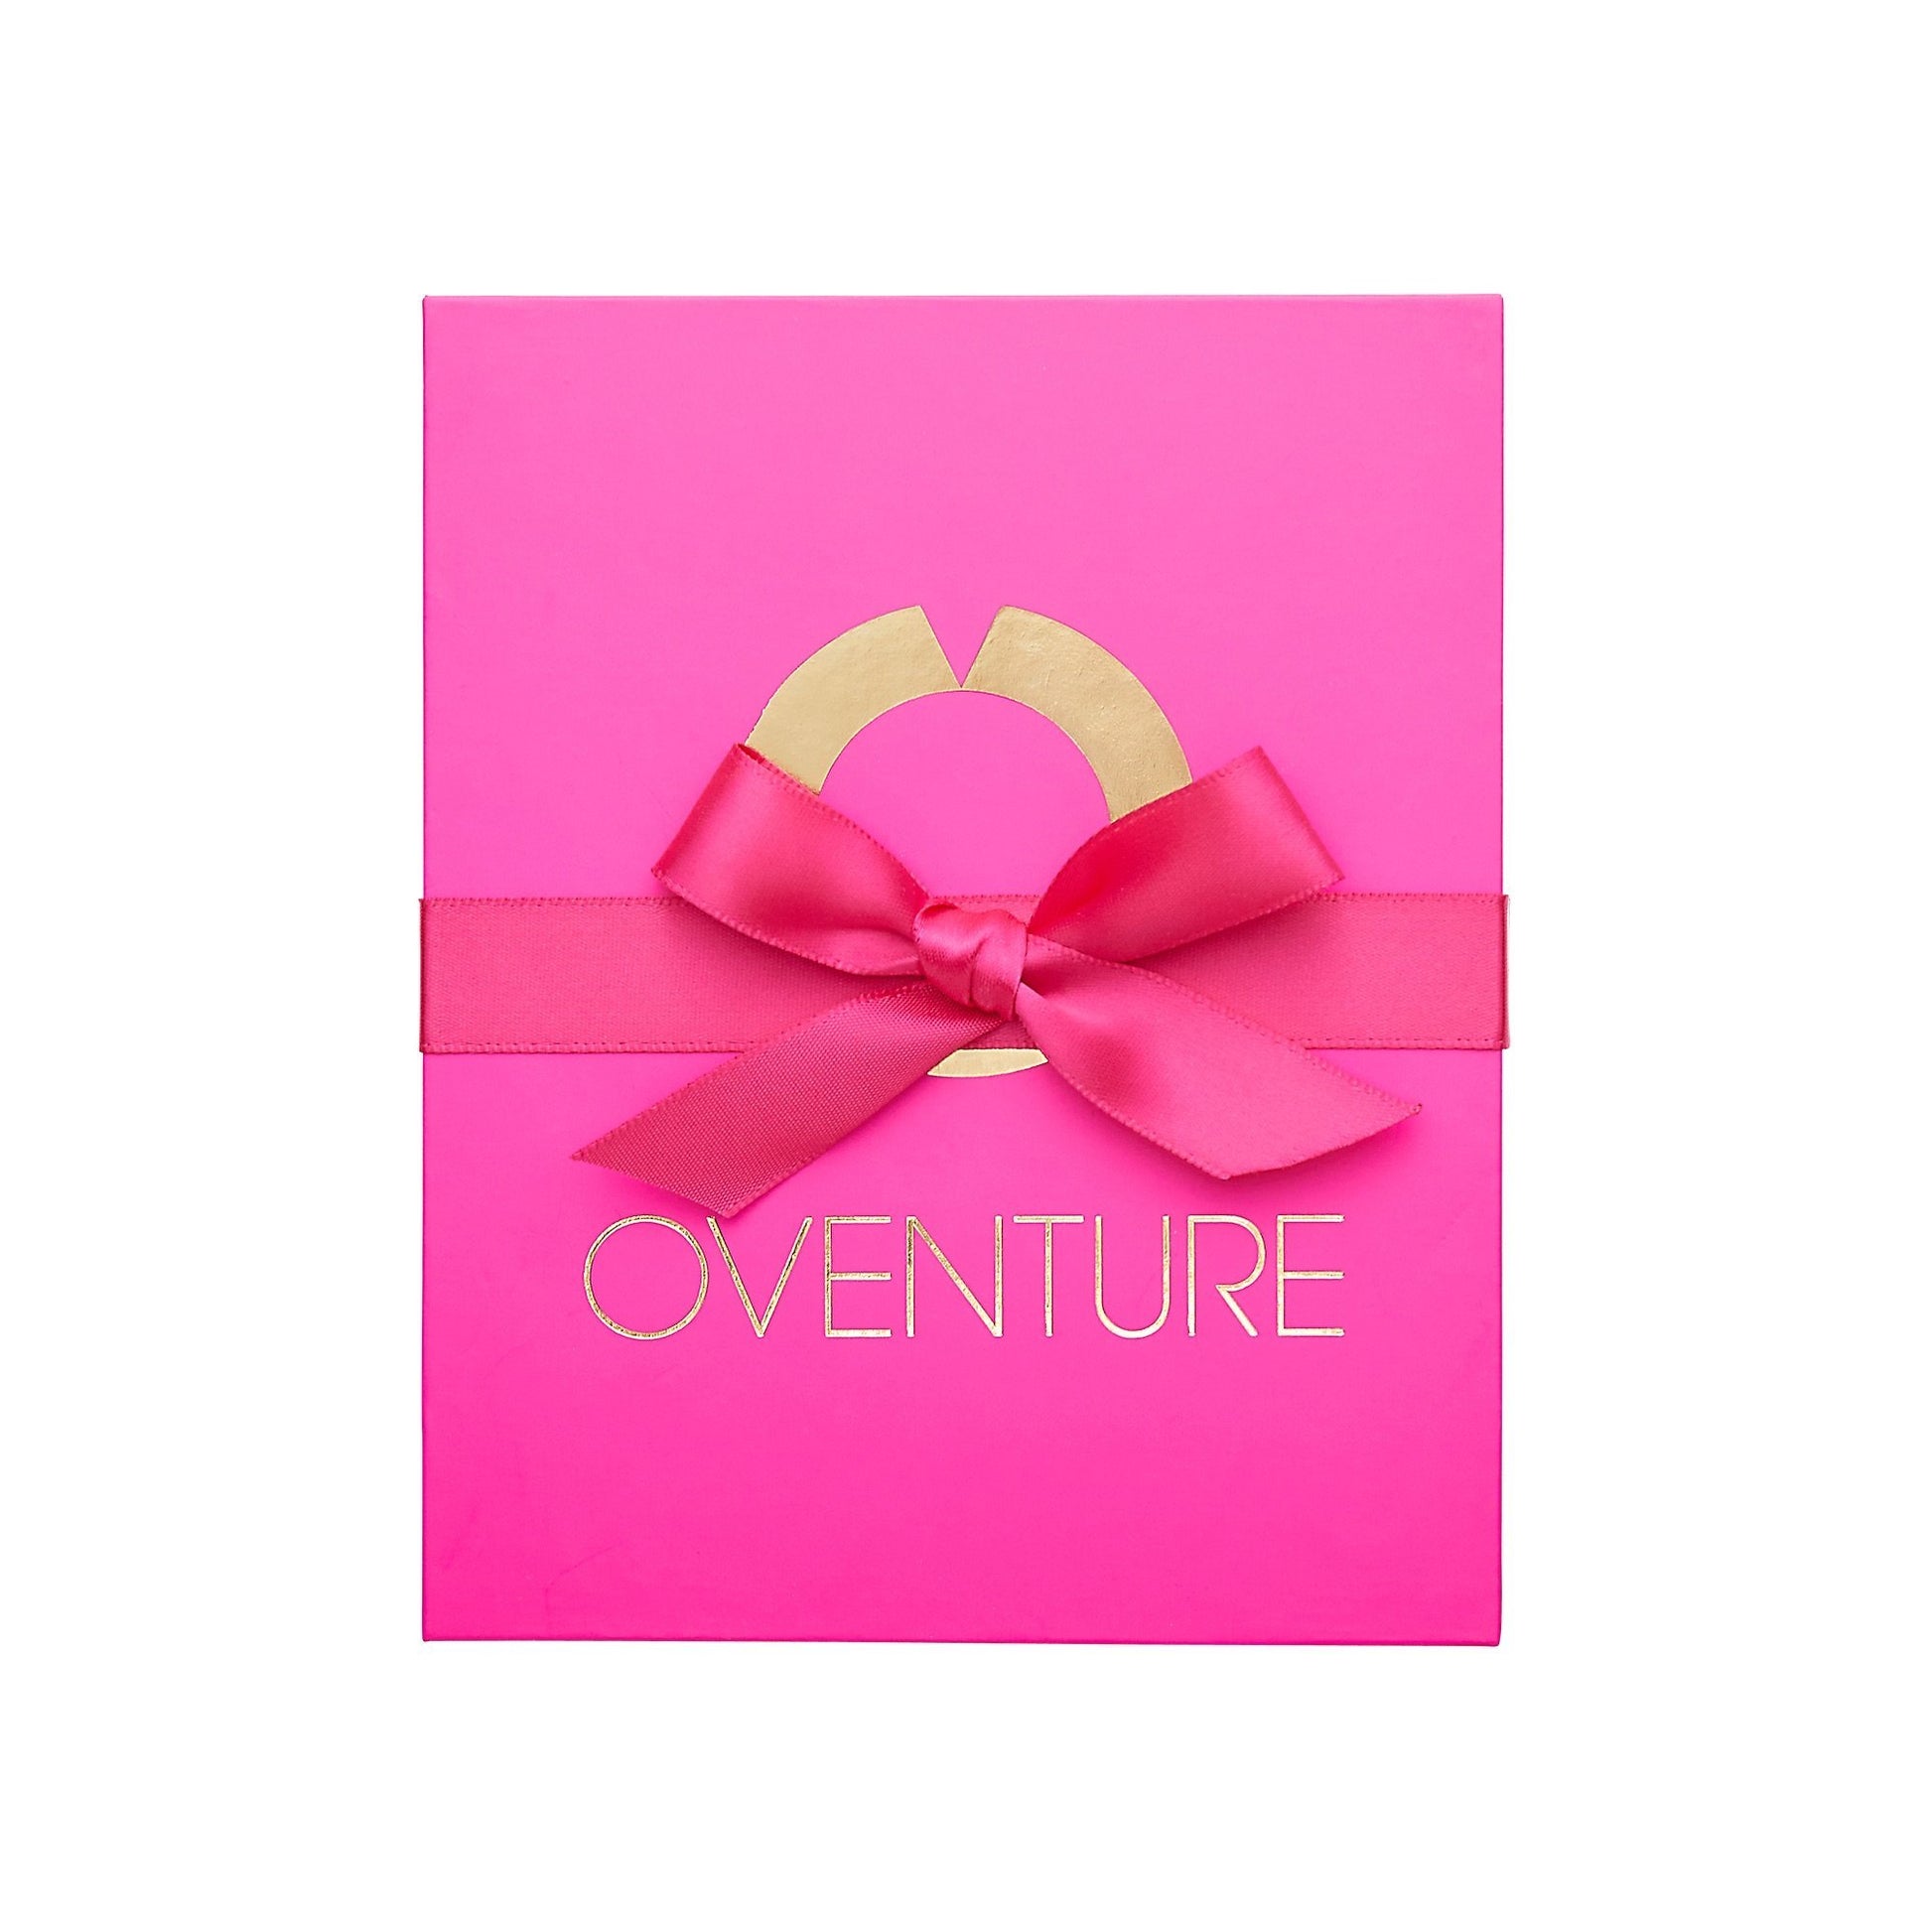 Hot Pink Oventure Gift Box with gold Oventure logo and hot pink bow